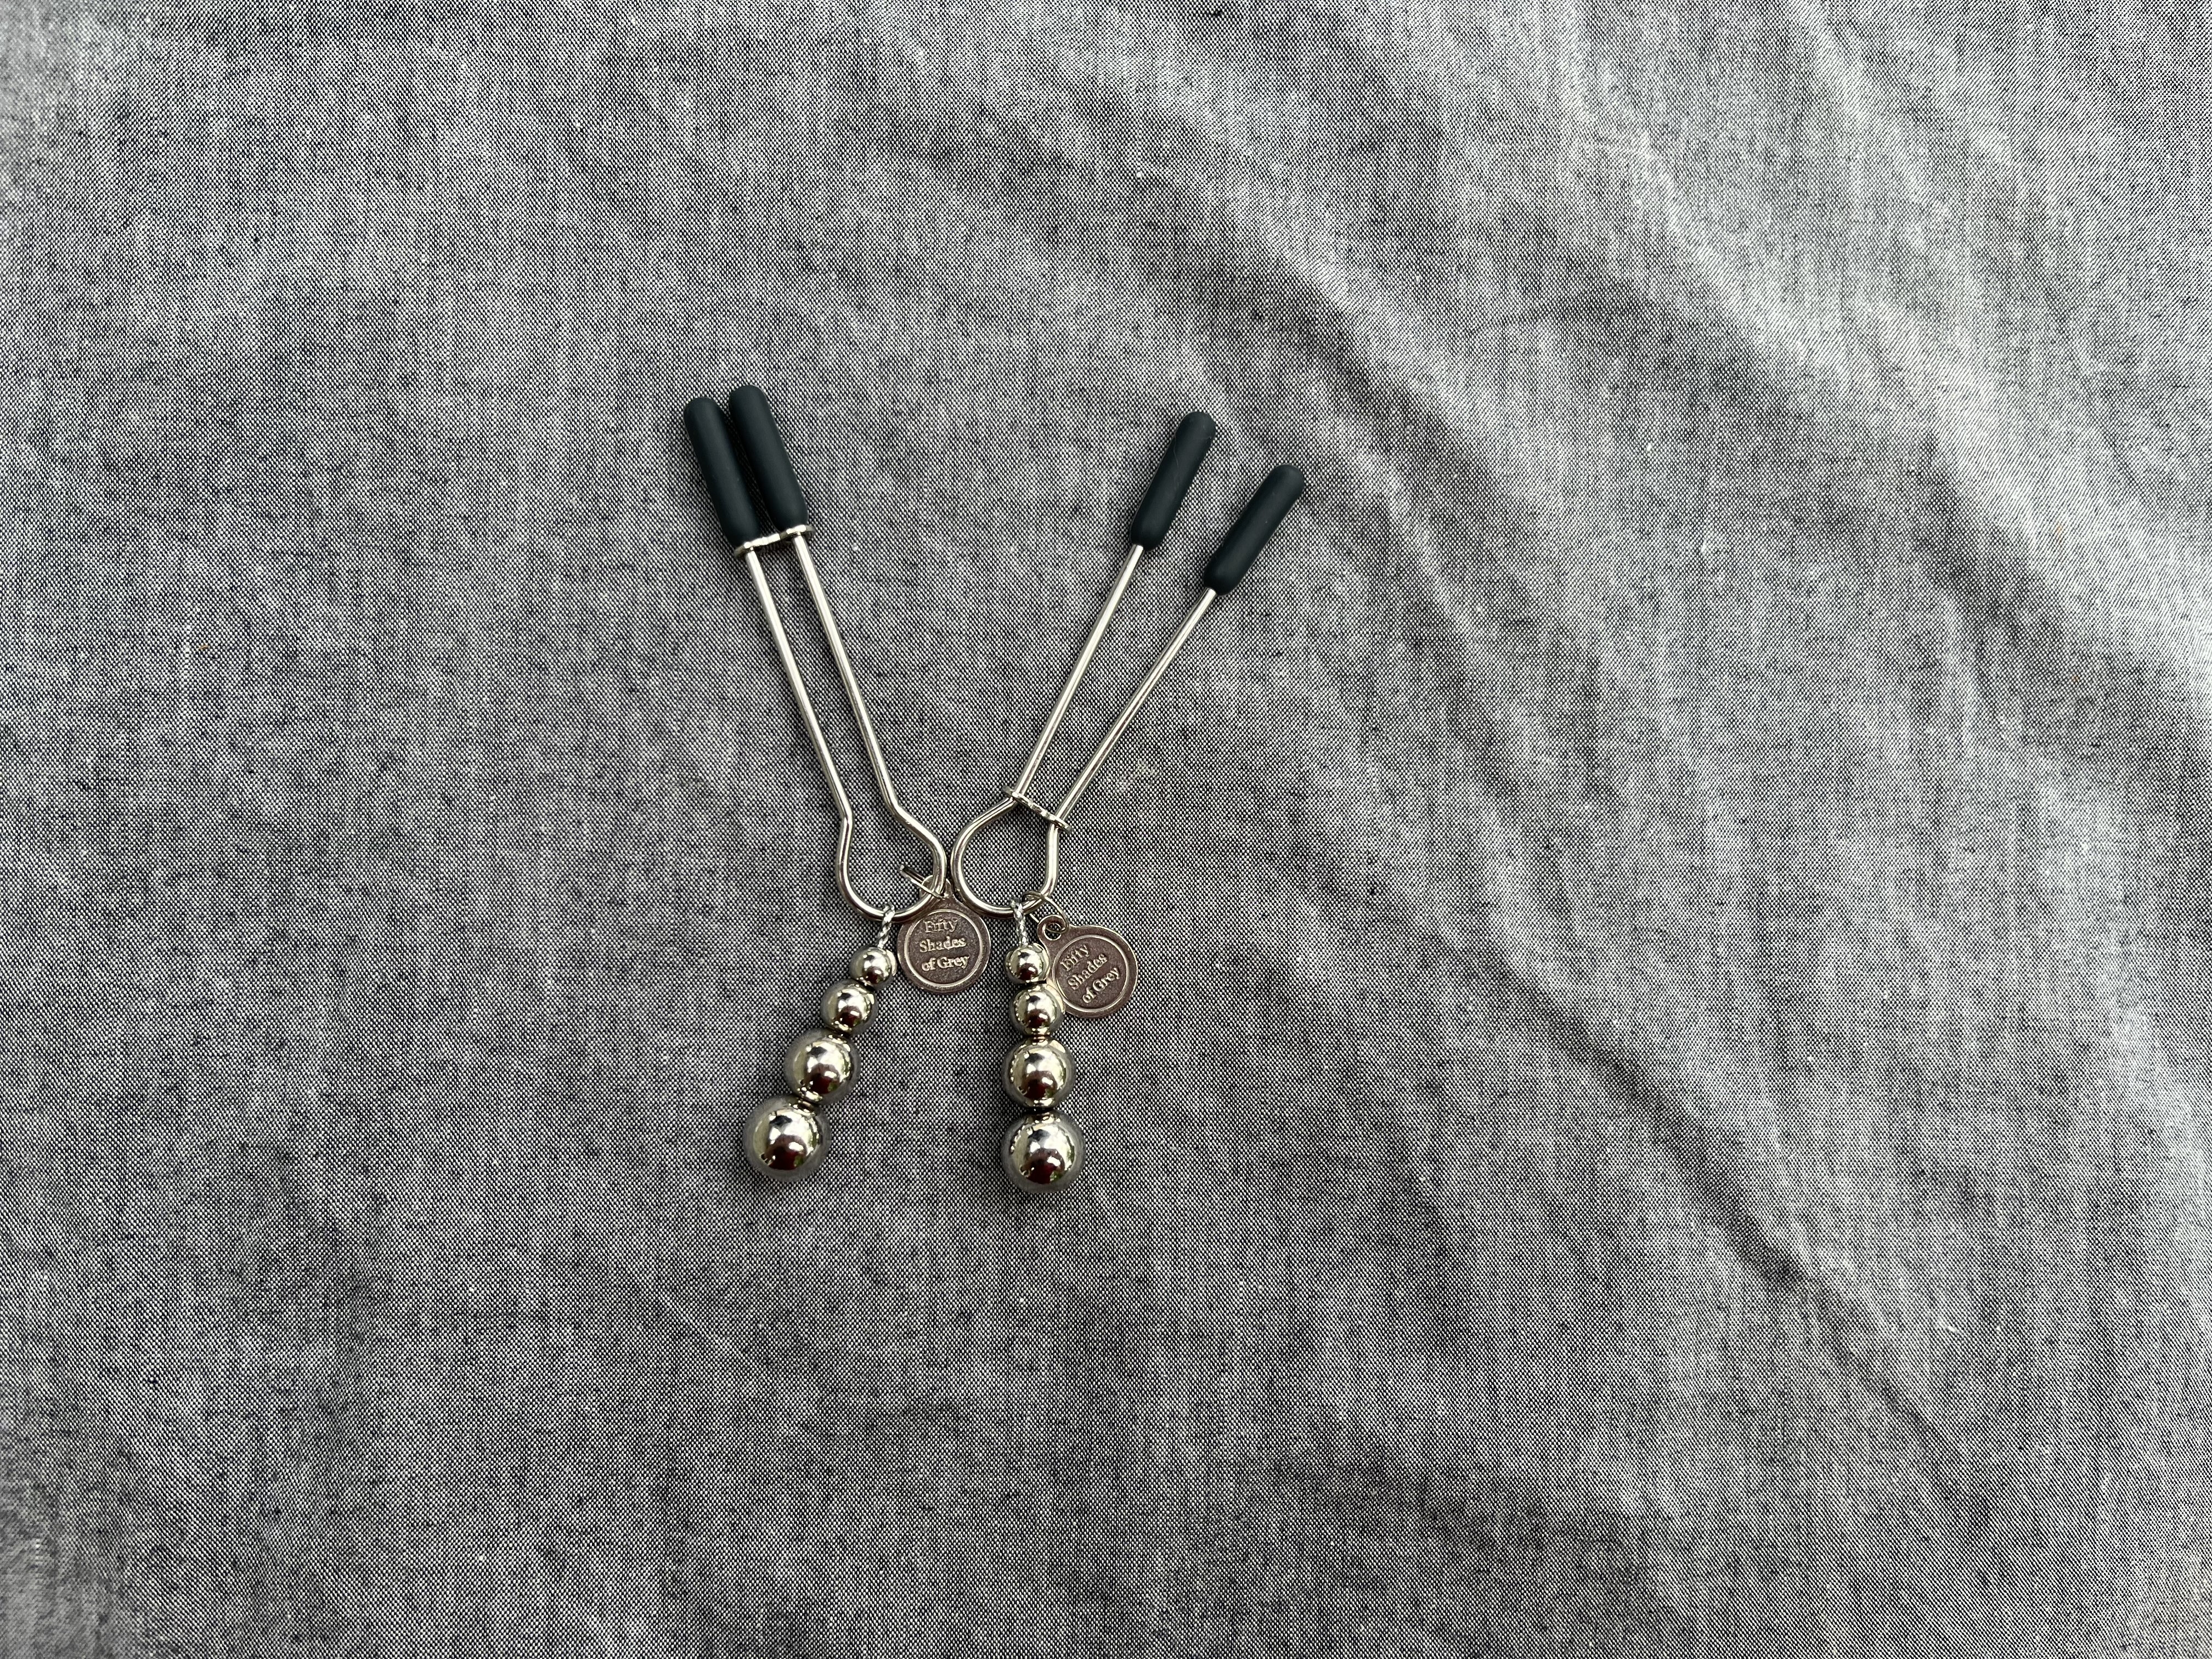 Fifty Shades of Grey Adjustable Nipple Clamps. Slide 4